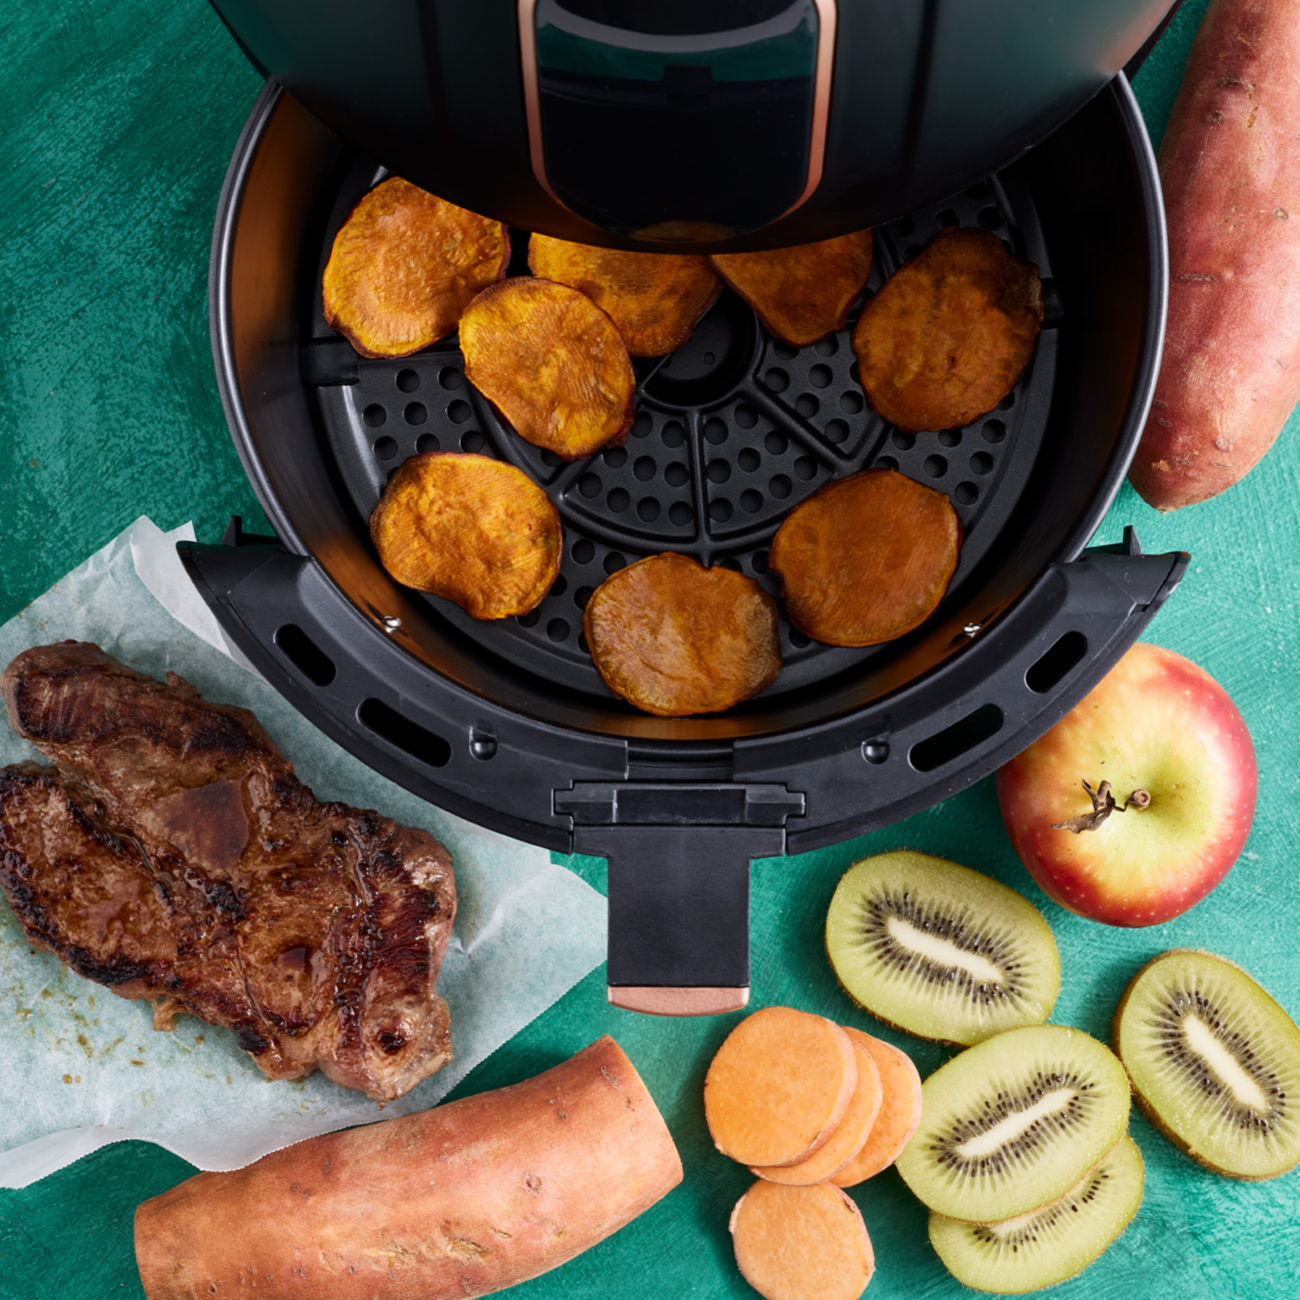 Can I pause the cooking process in the air fryer and resume later?